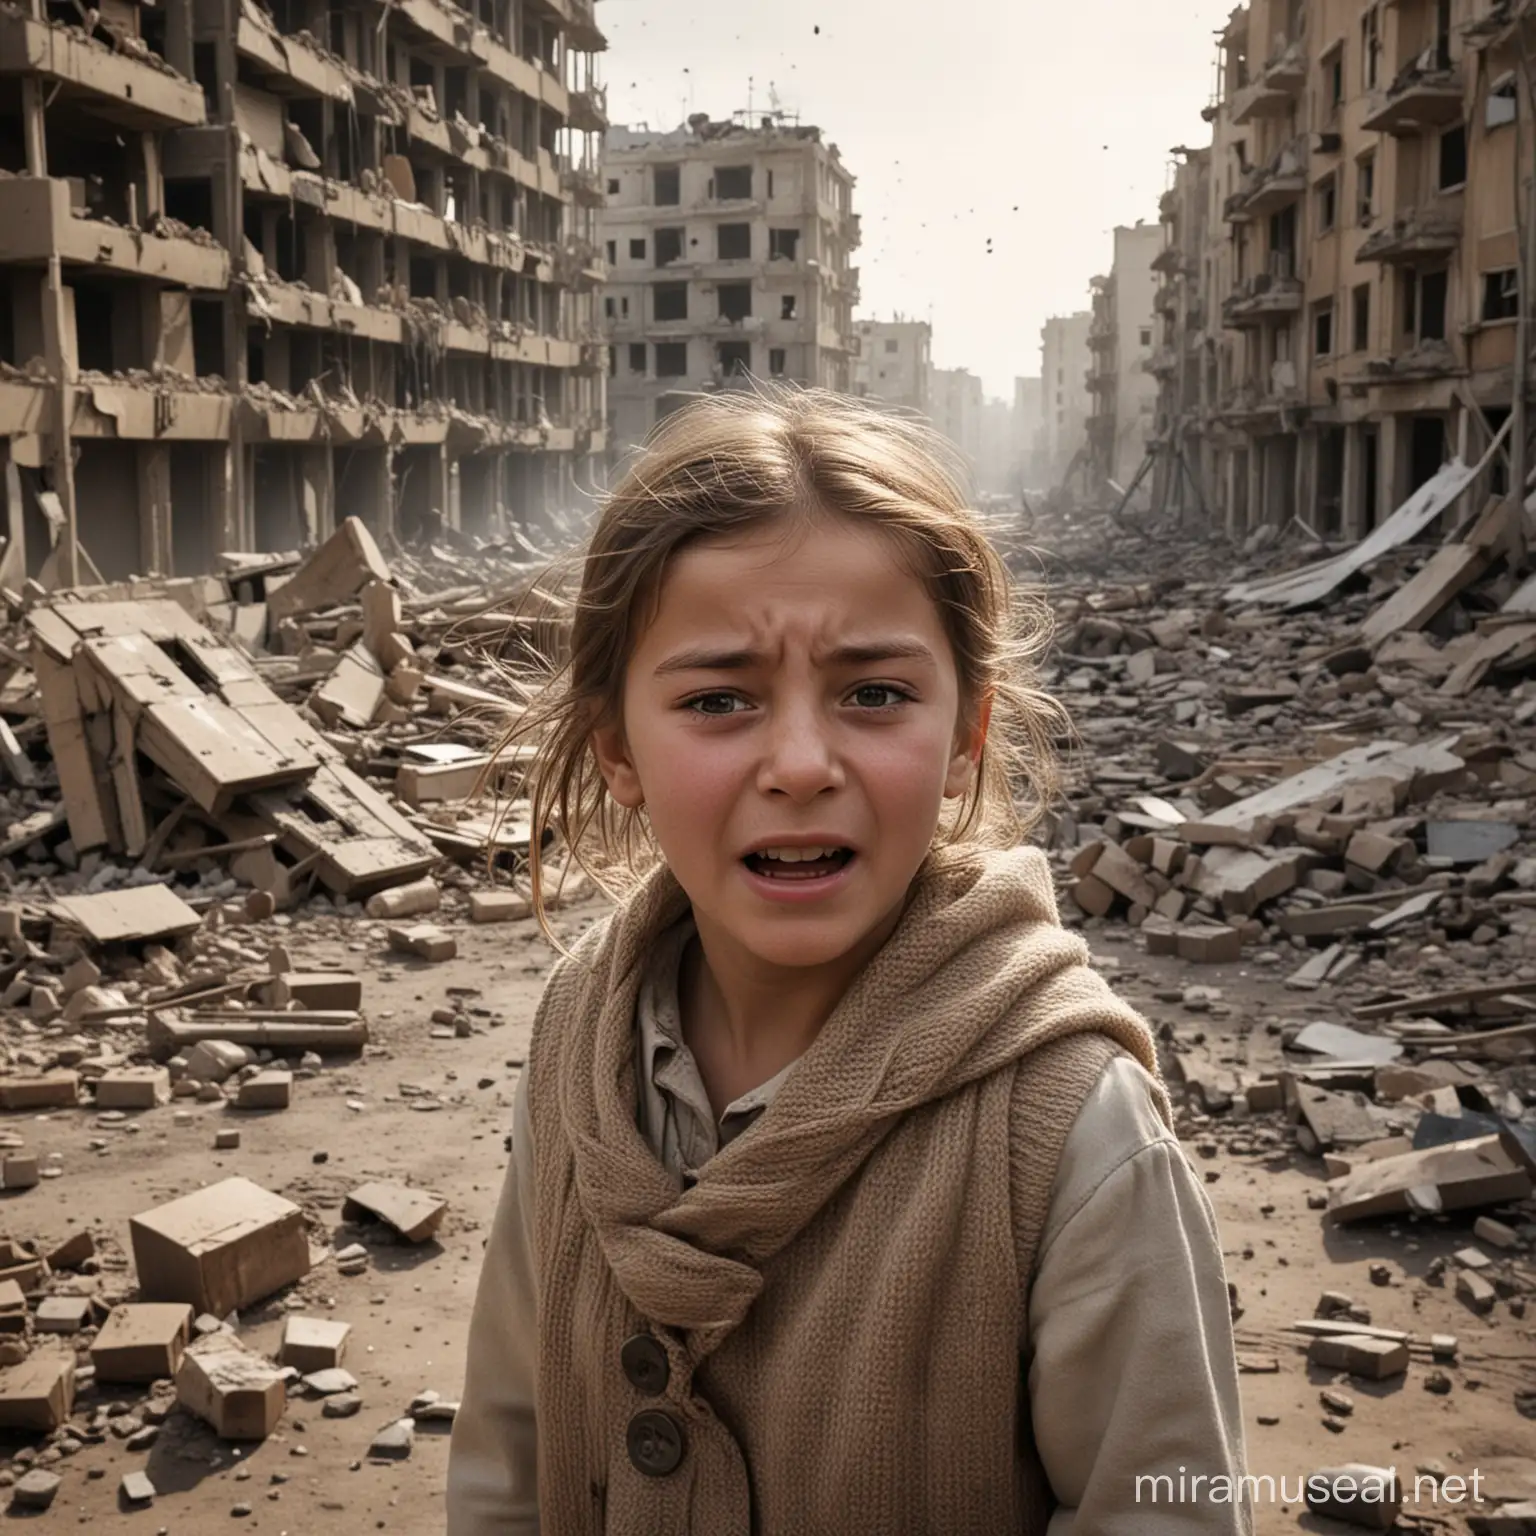 A young female child crying in a war area with bombs falling down and buildings destroyed.